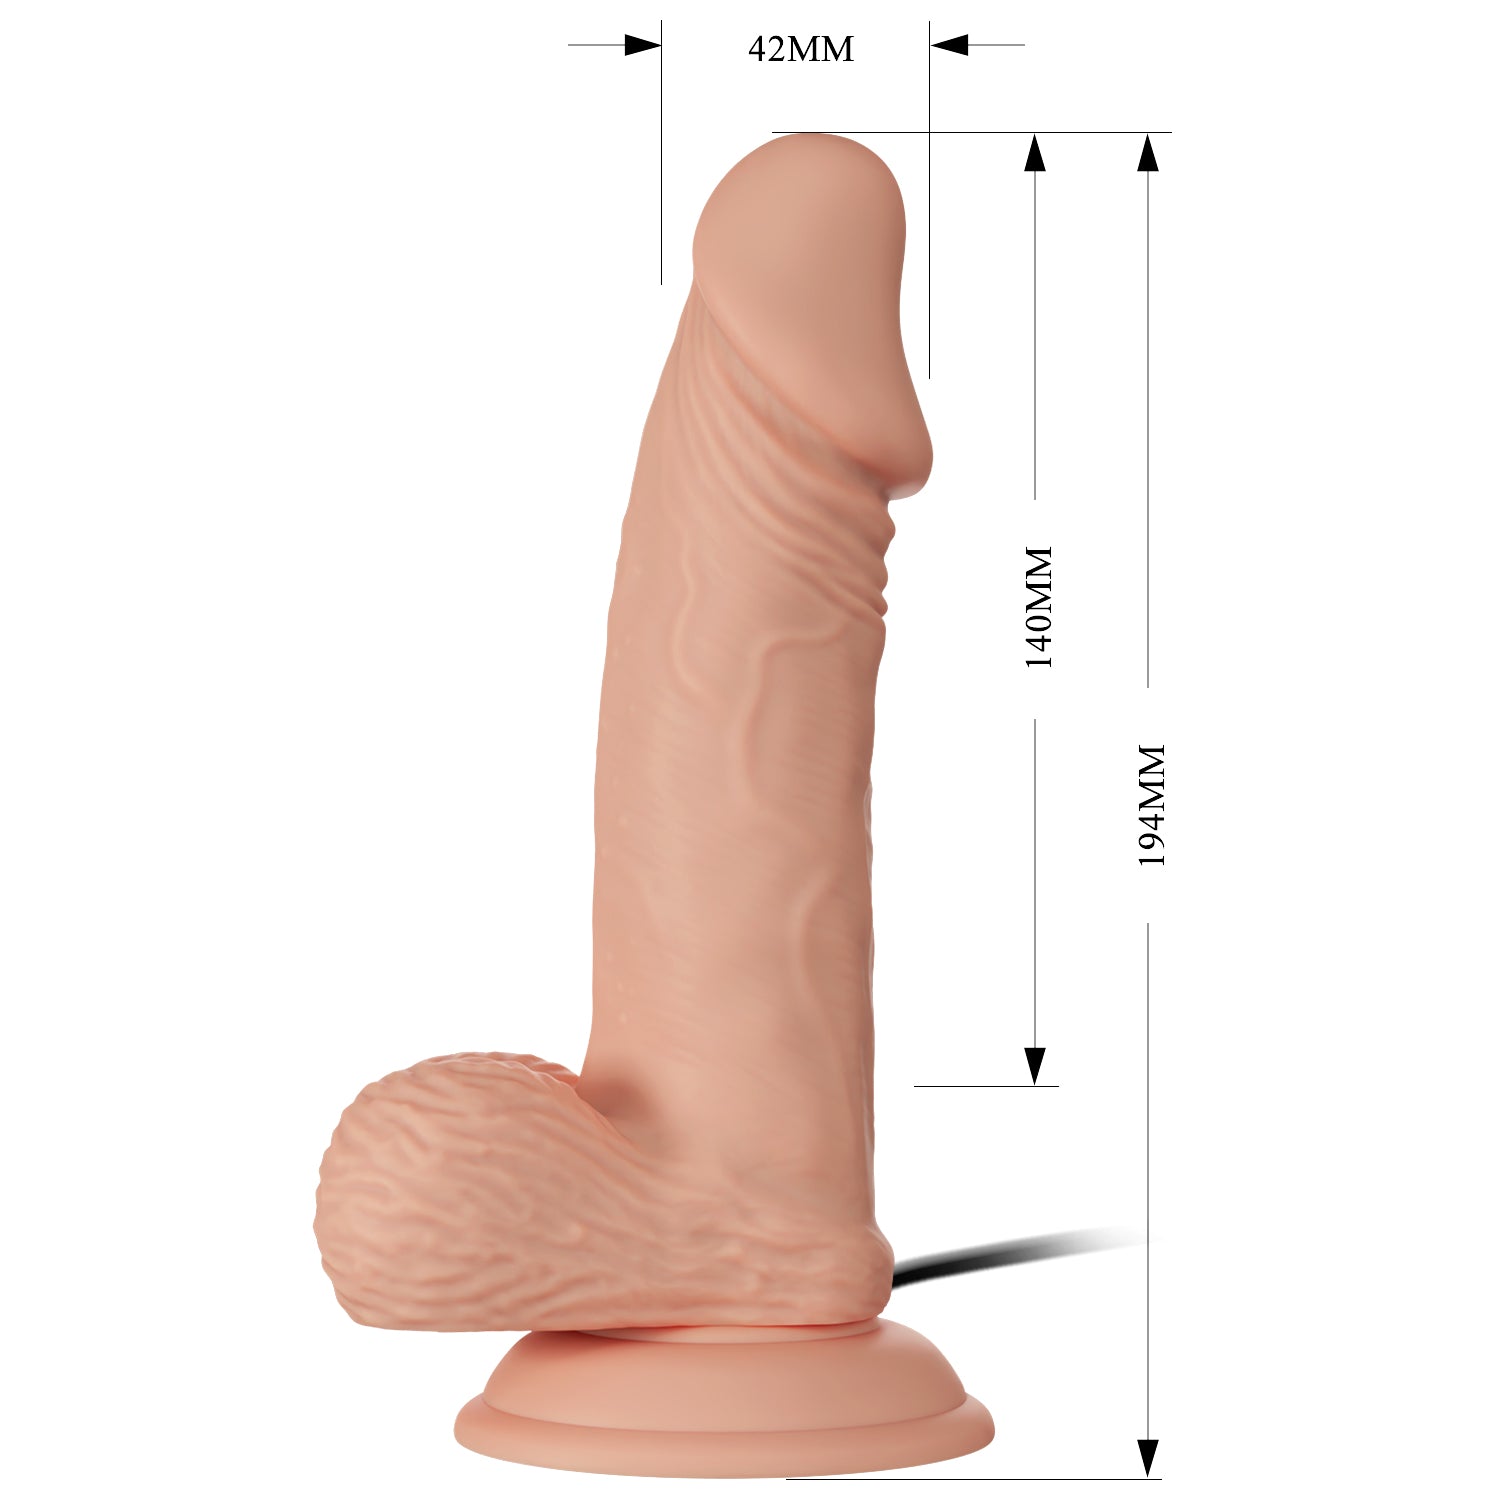 Baile 7.6 Inch Lifelike Vibrating Dildo with Suction Cup in Flesh